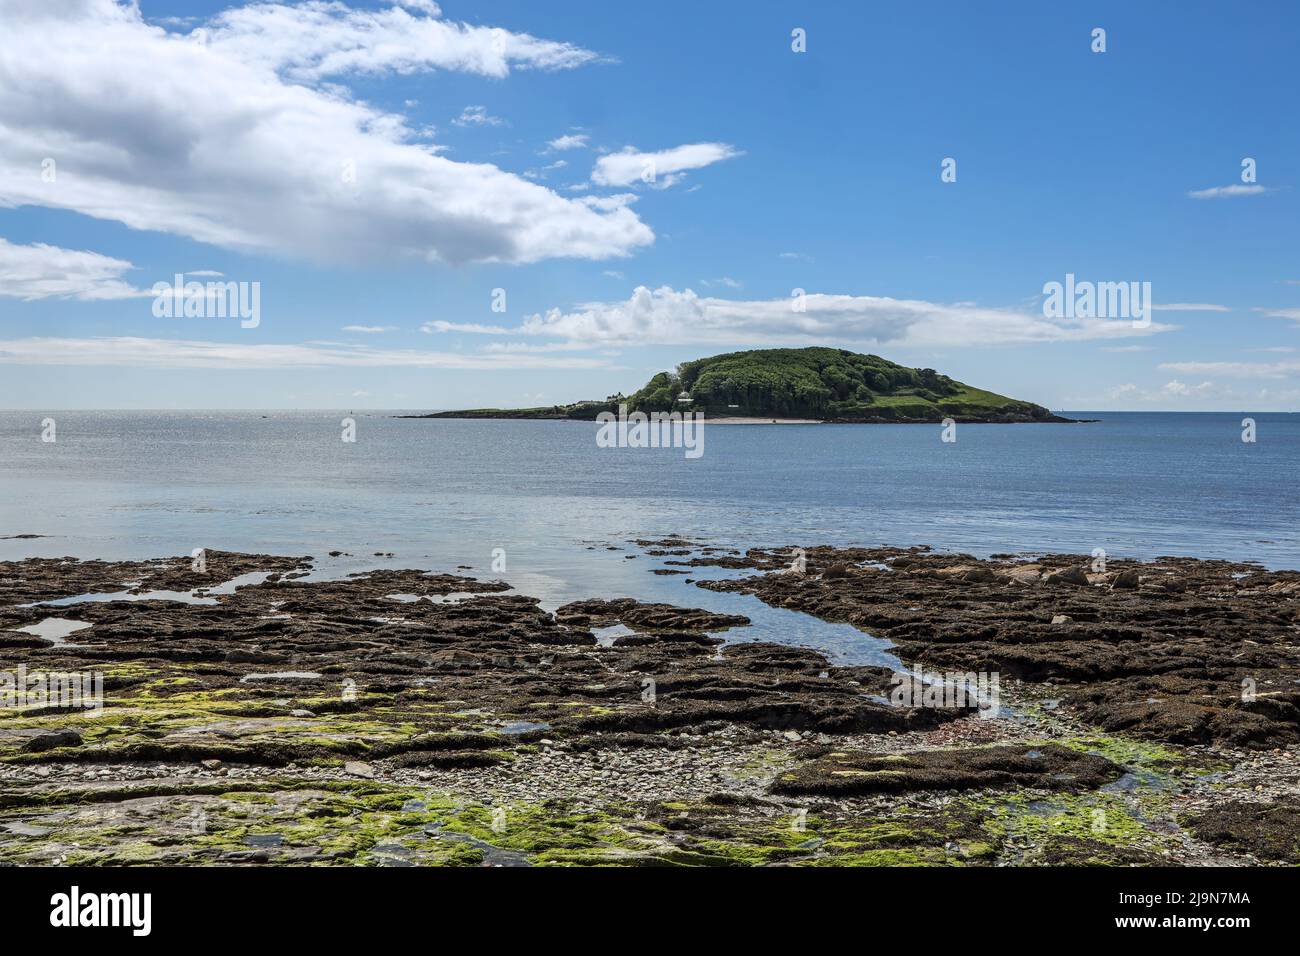 Looe Island from Hannafore, West Looe, Cornwall. According to local legend Joseph of Arimathea landed here with the Christ child. Now owned and manage Stock Photo